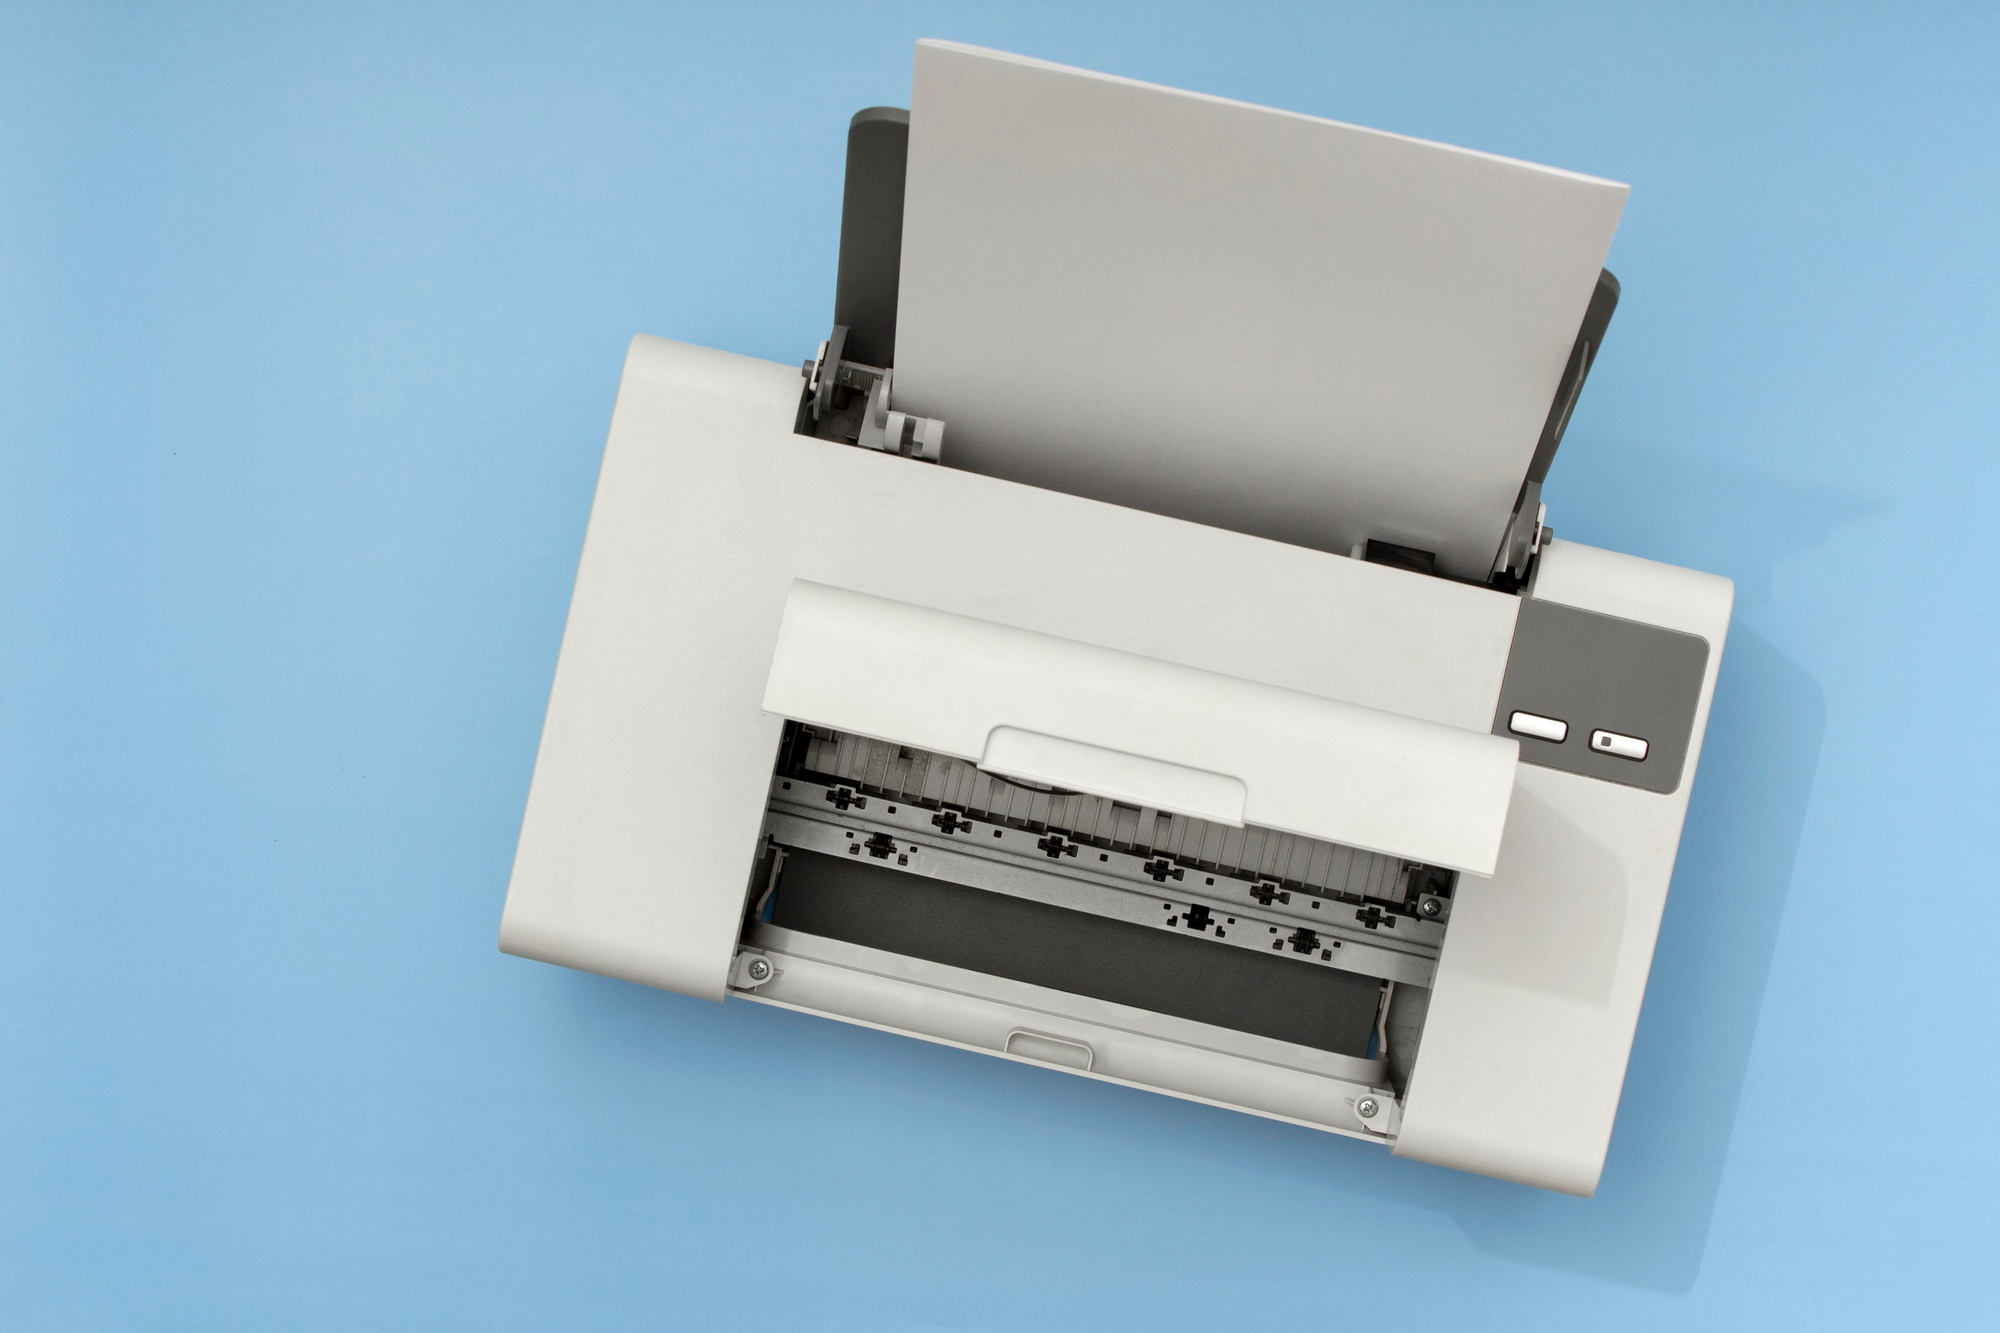 The Best Brother Laser Printers: Our Top Picks